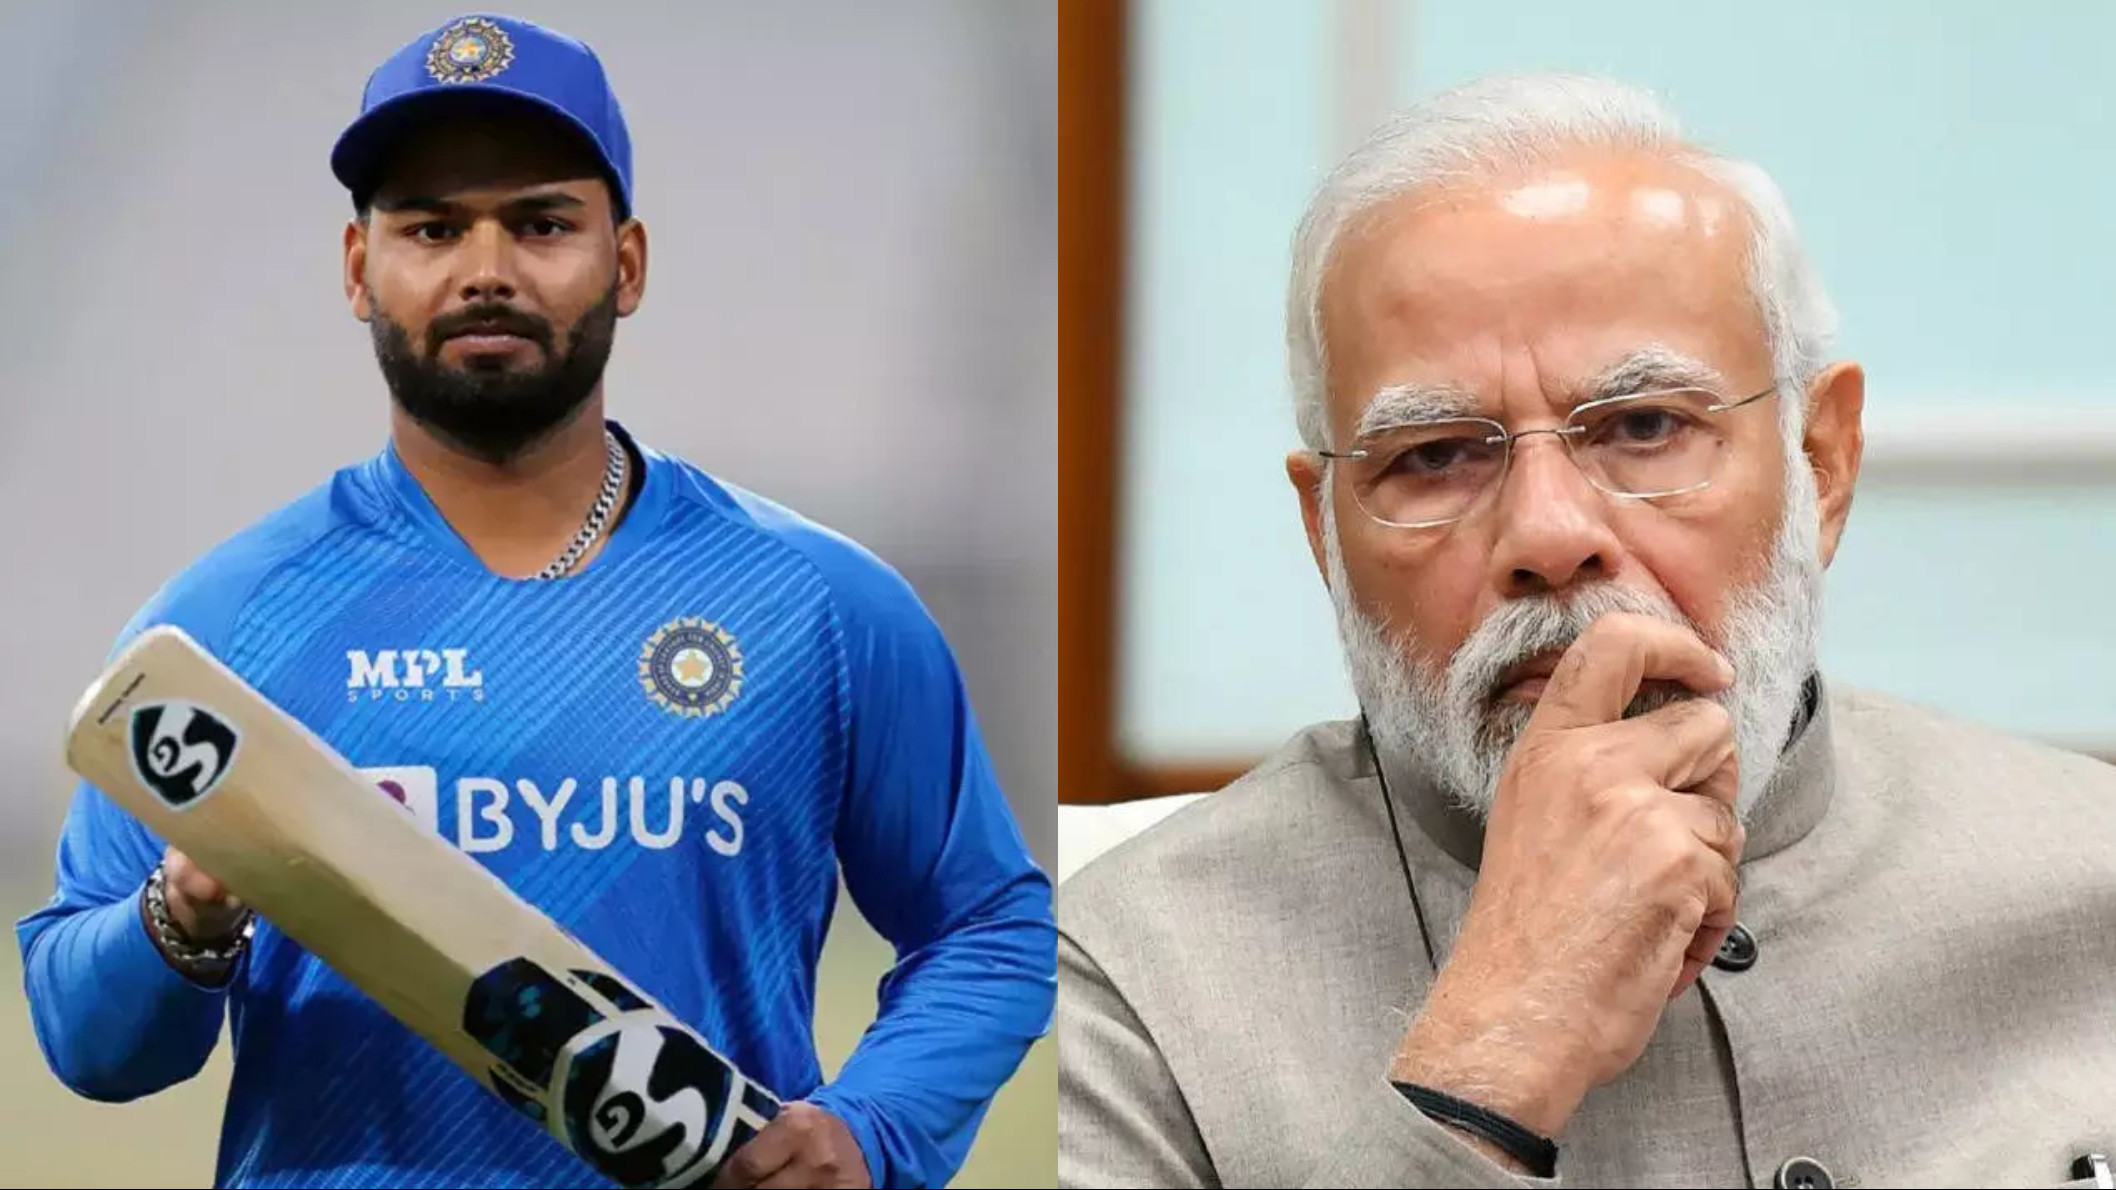 PM Narendra Modi sends his prayers to Rishabh Pant for a speedy recovery after his car accident  